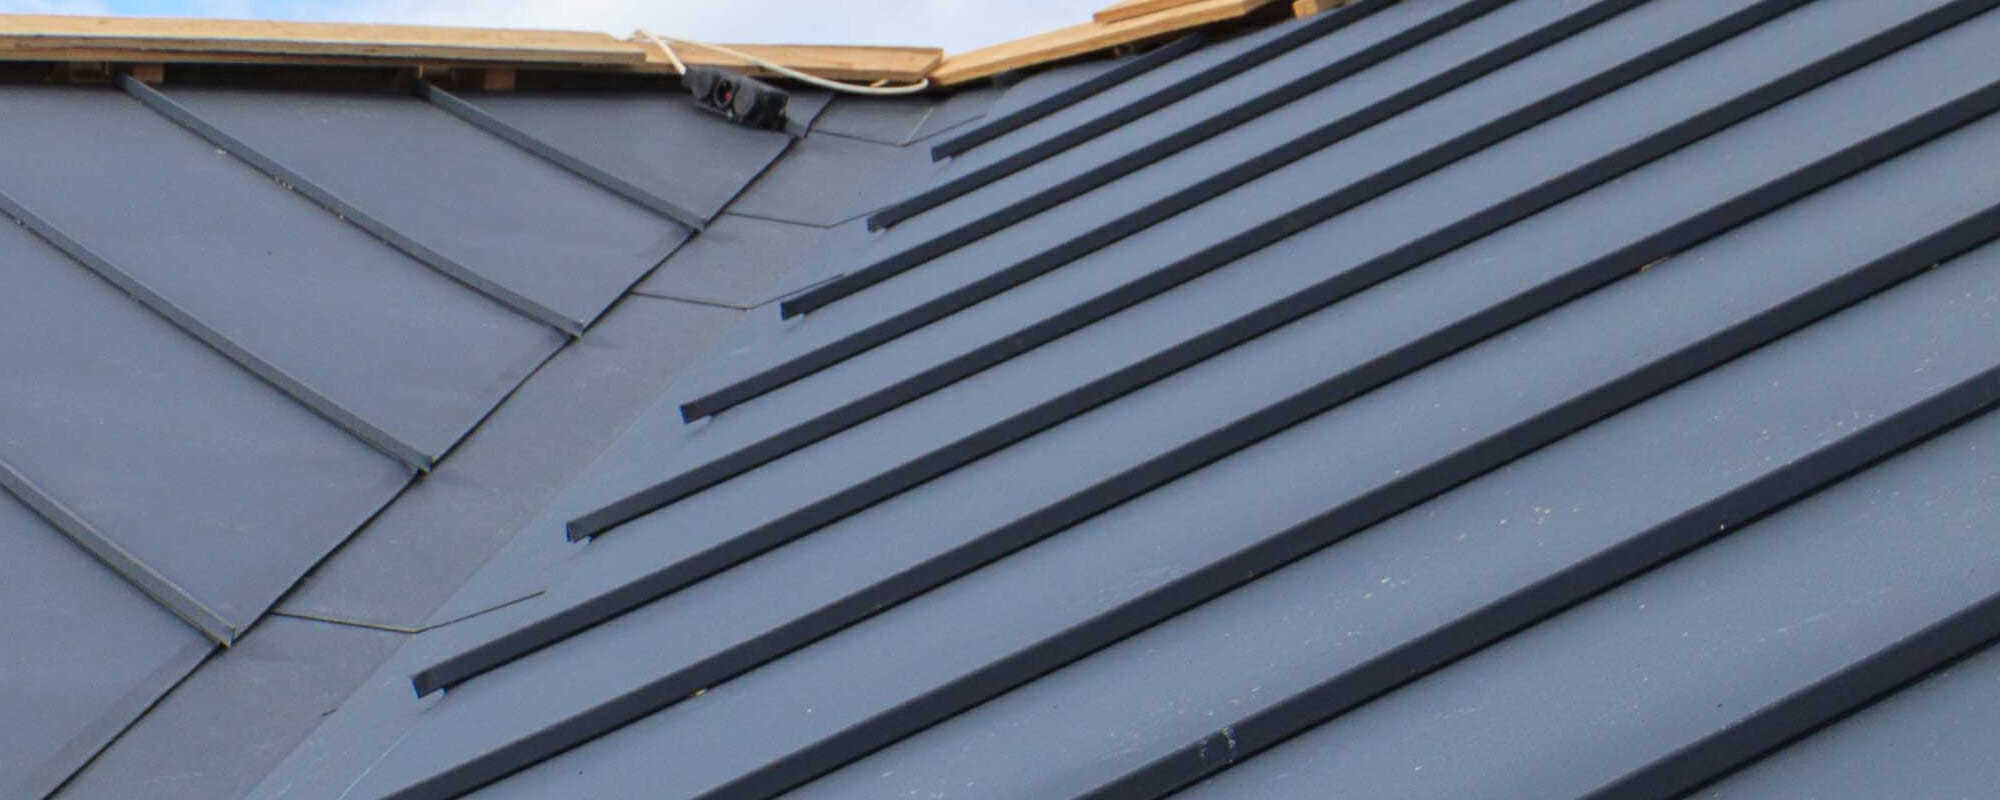 best metal roof repair and replacement company Norfolk and Chesapeake